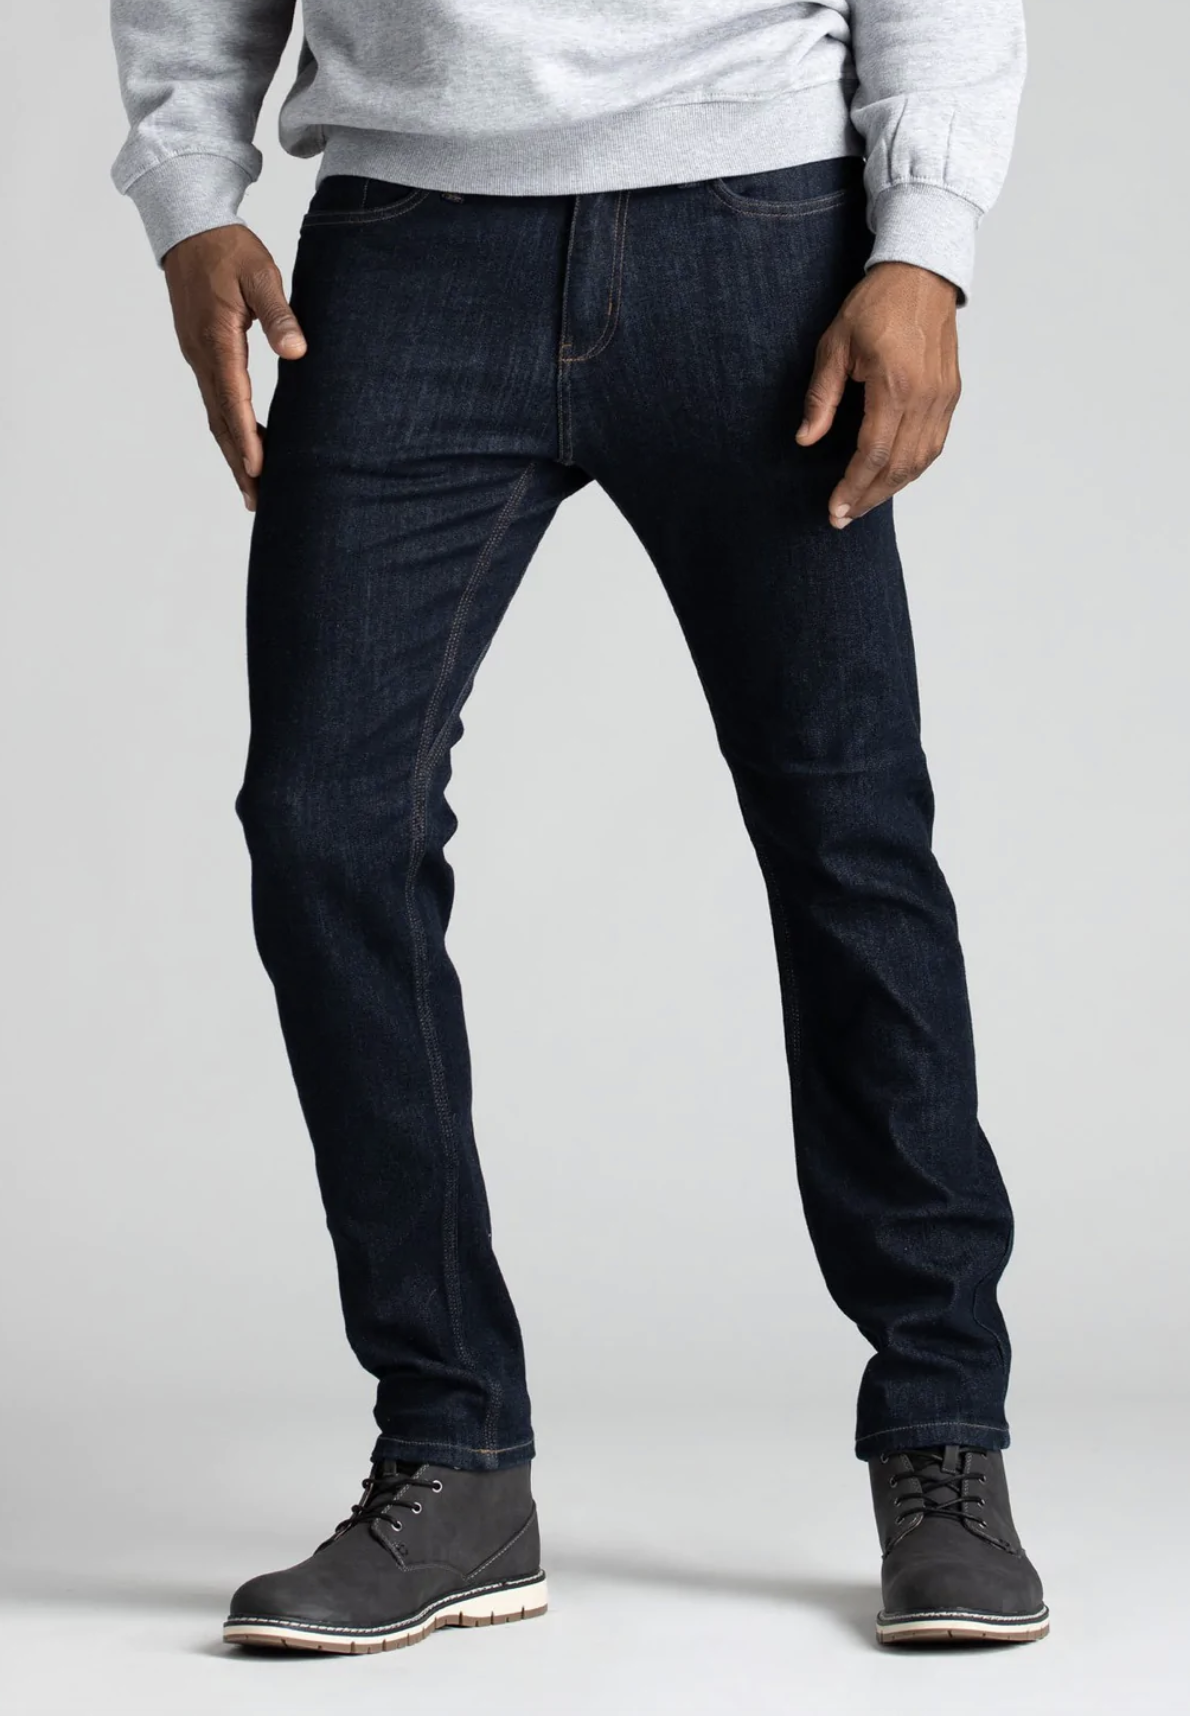 All One Releases New Biker Coolmax LT Jeans